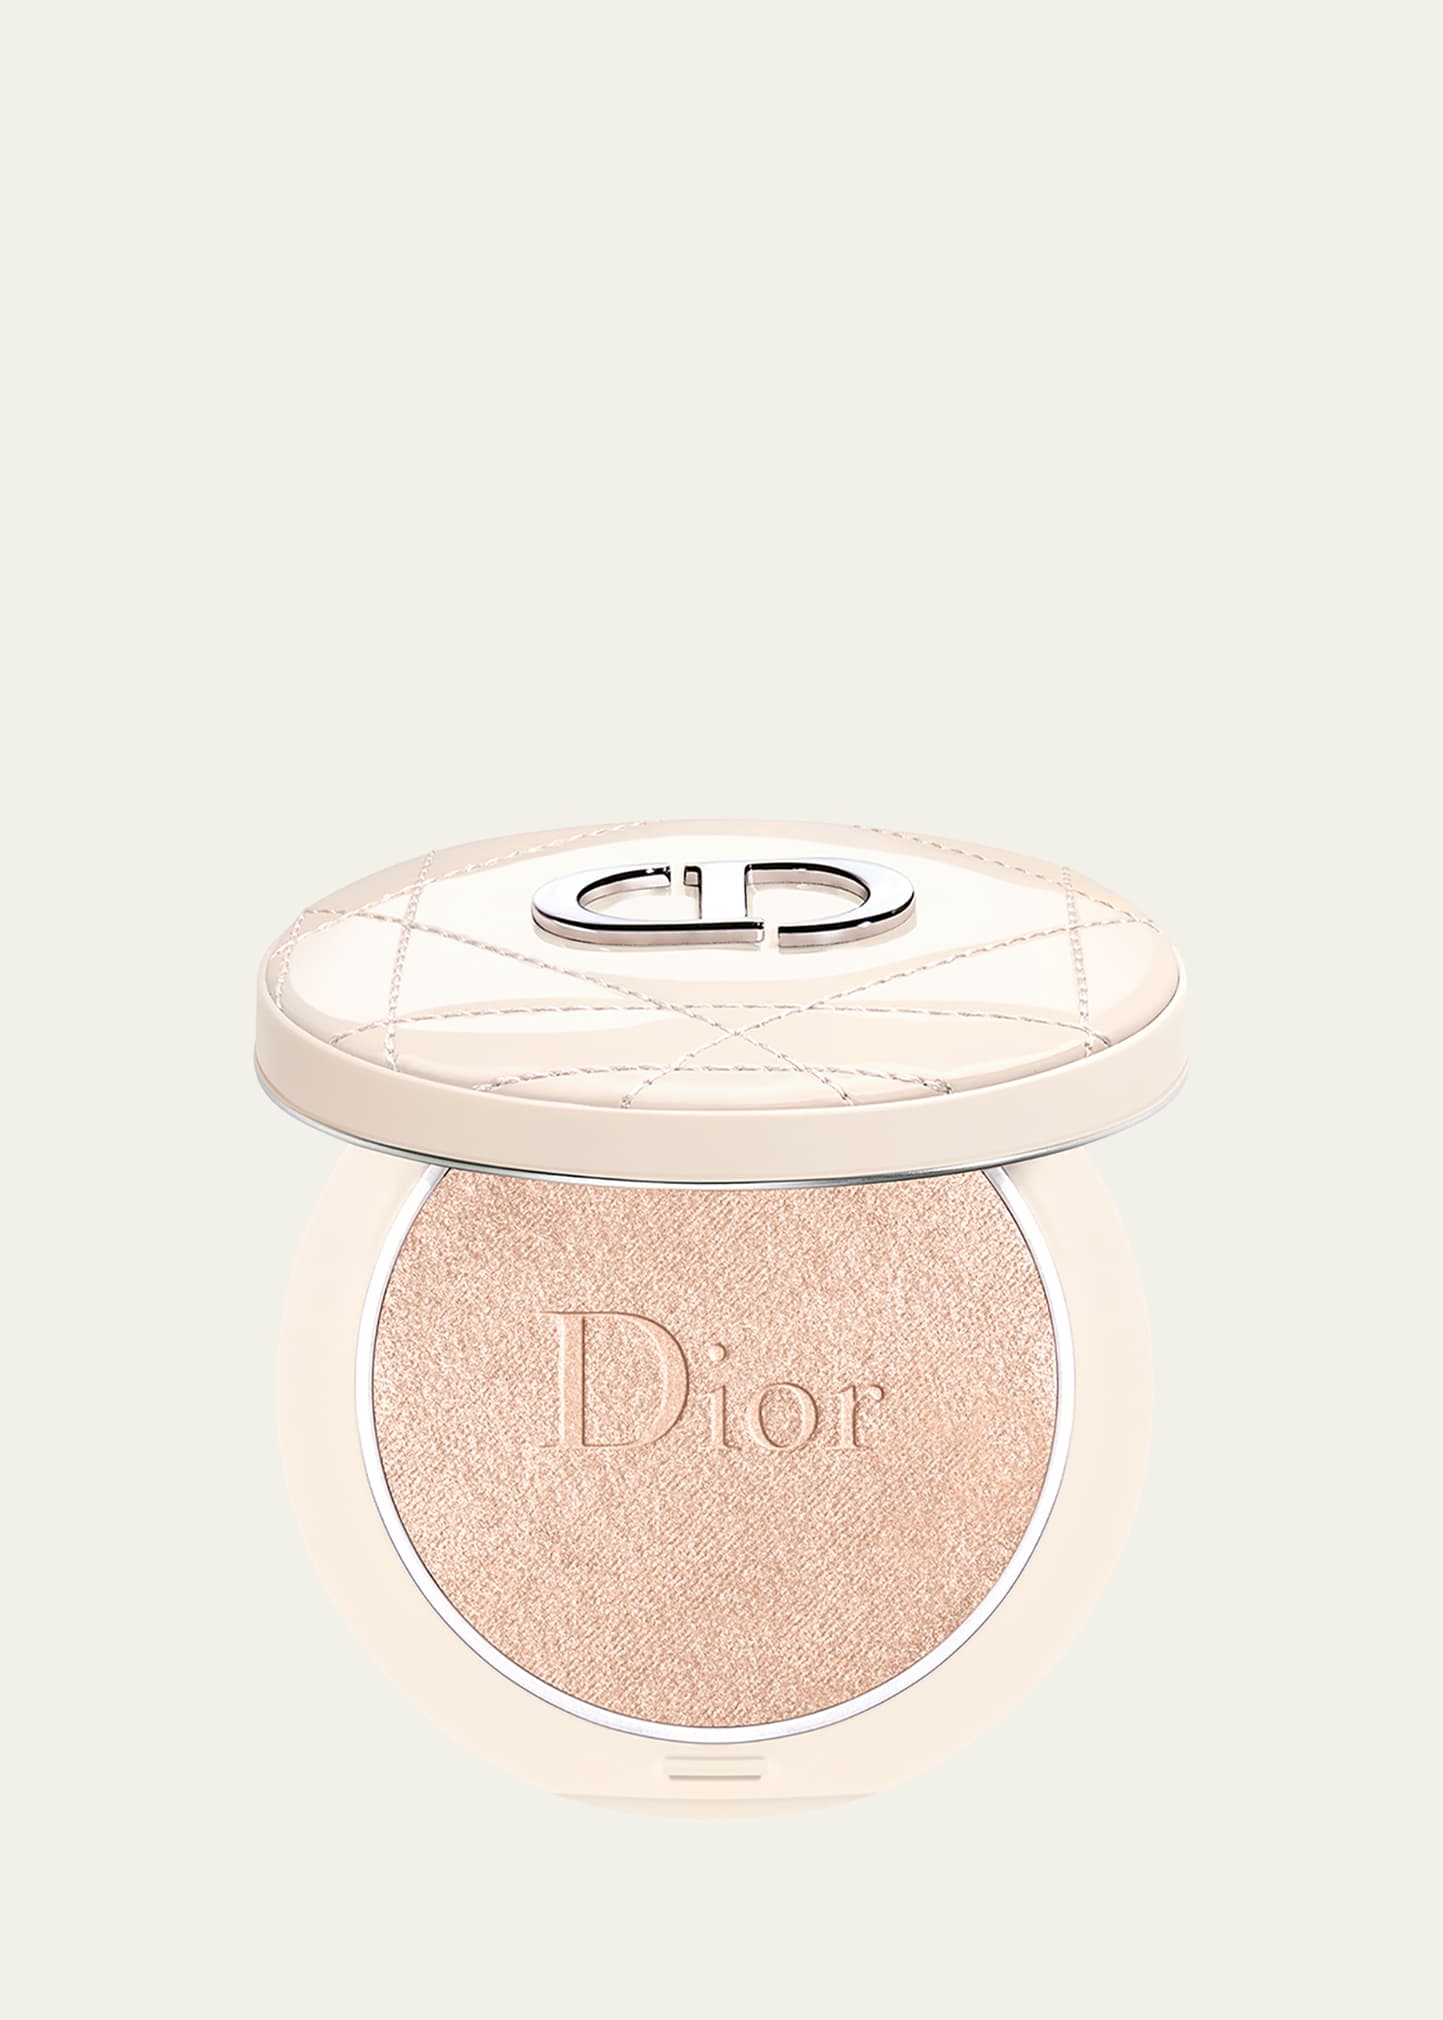 Dior Forever Couture Luminizer In 001 Nude Glow